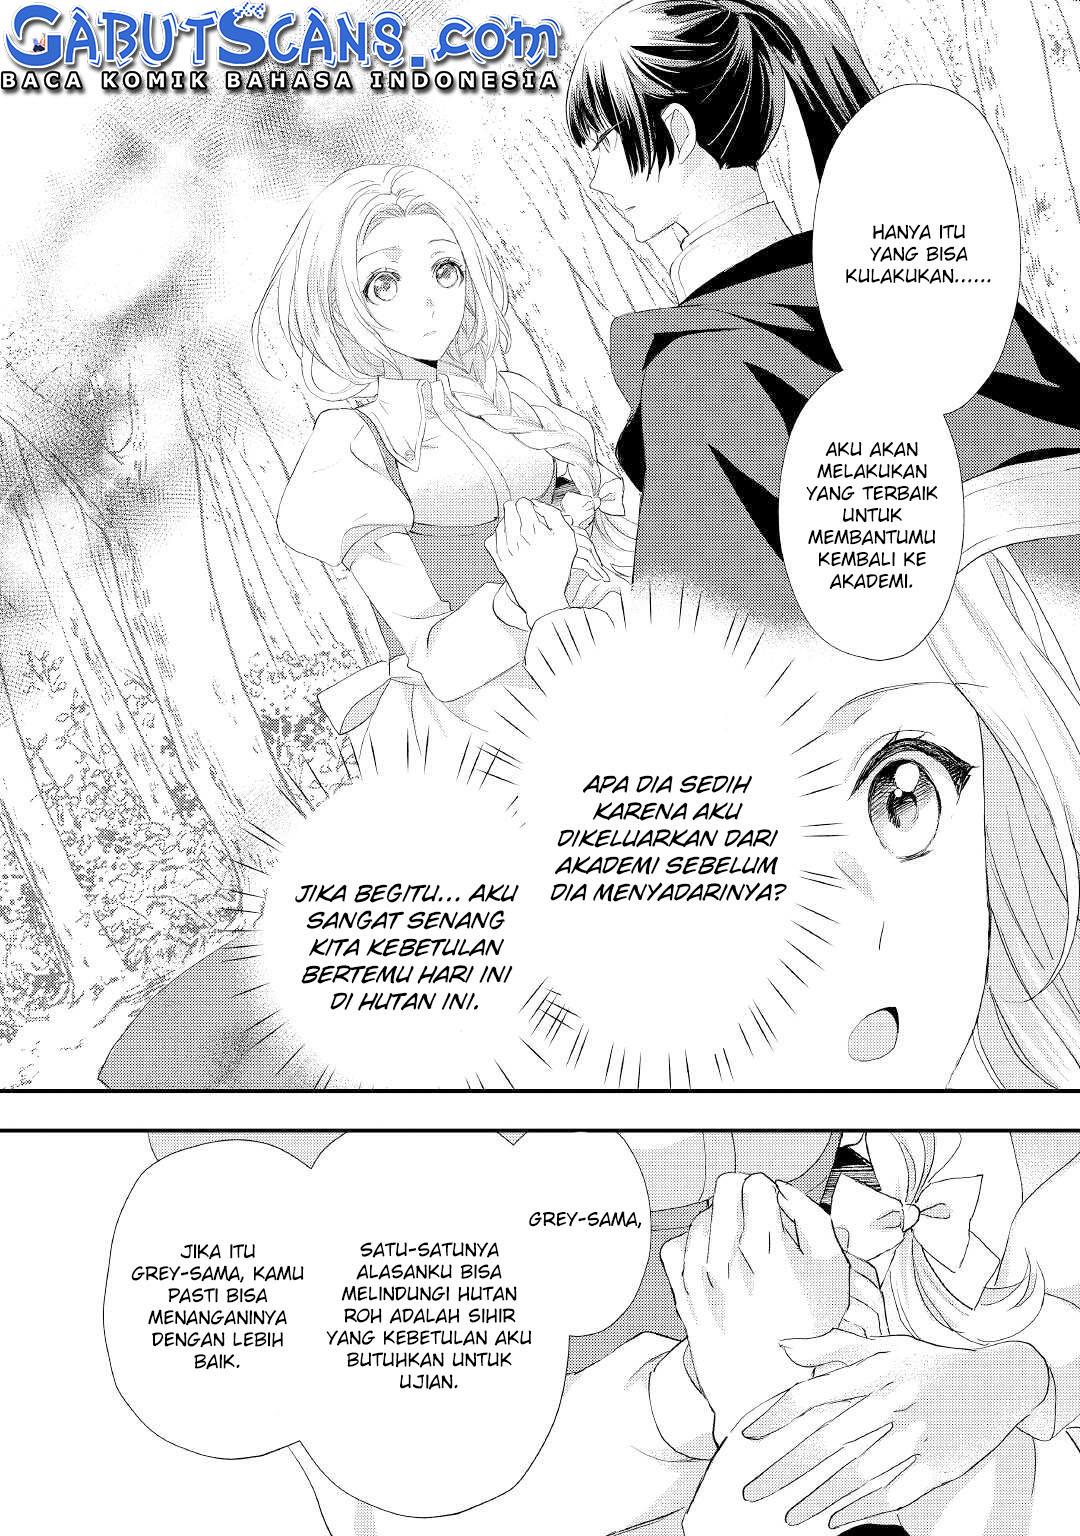 Milady Just Wants to Relax Chapter 24